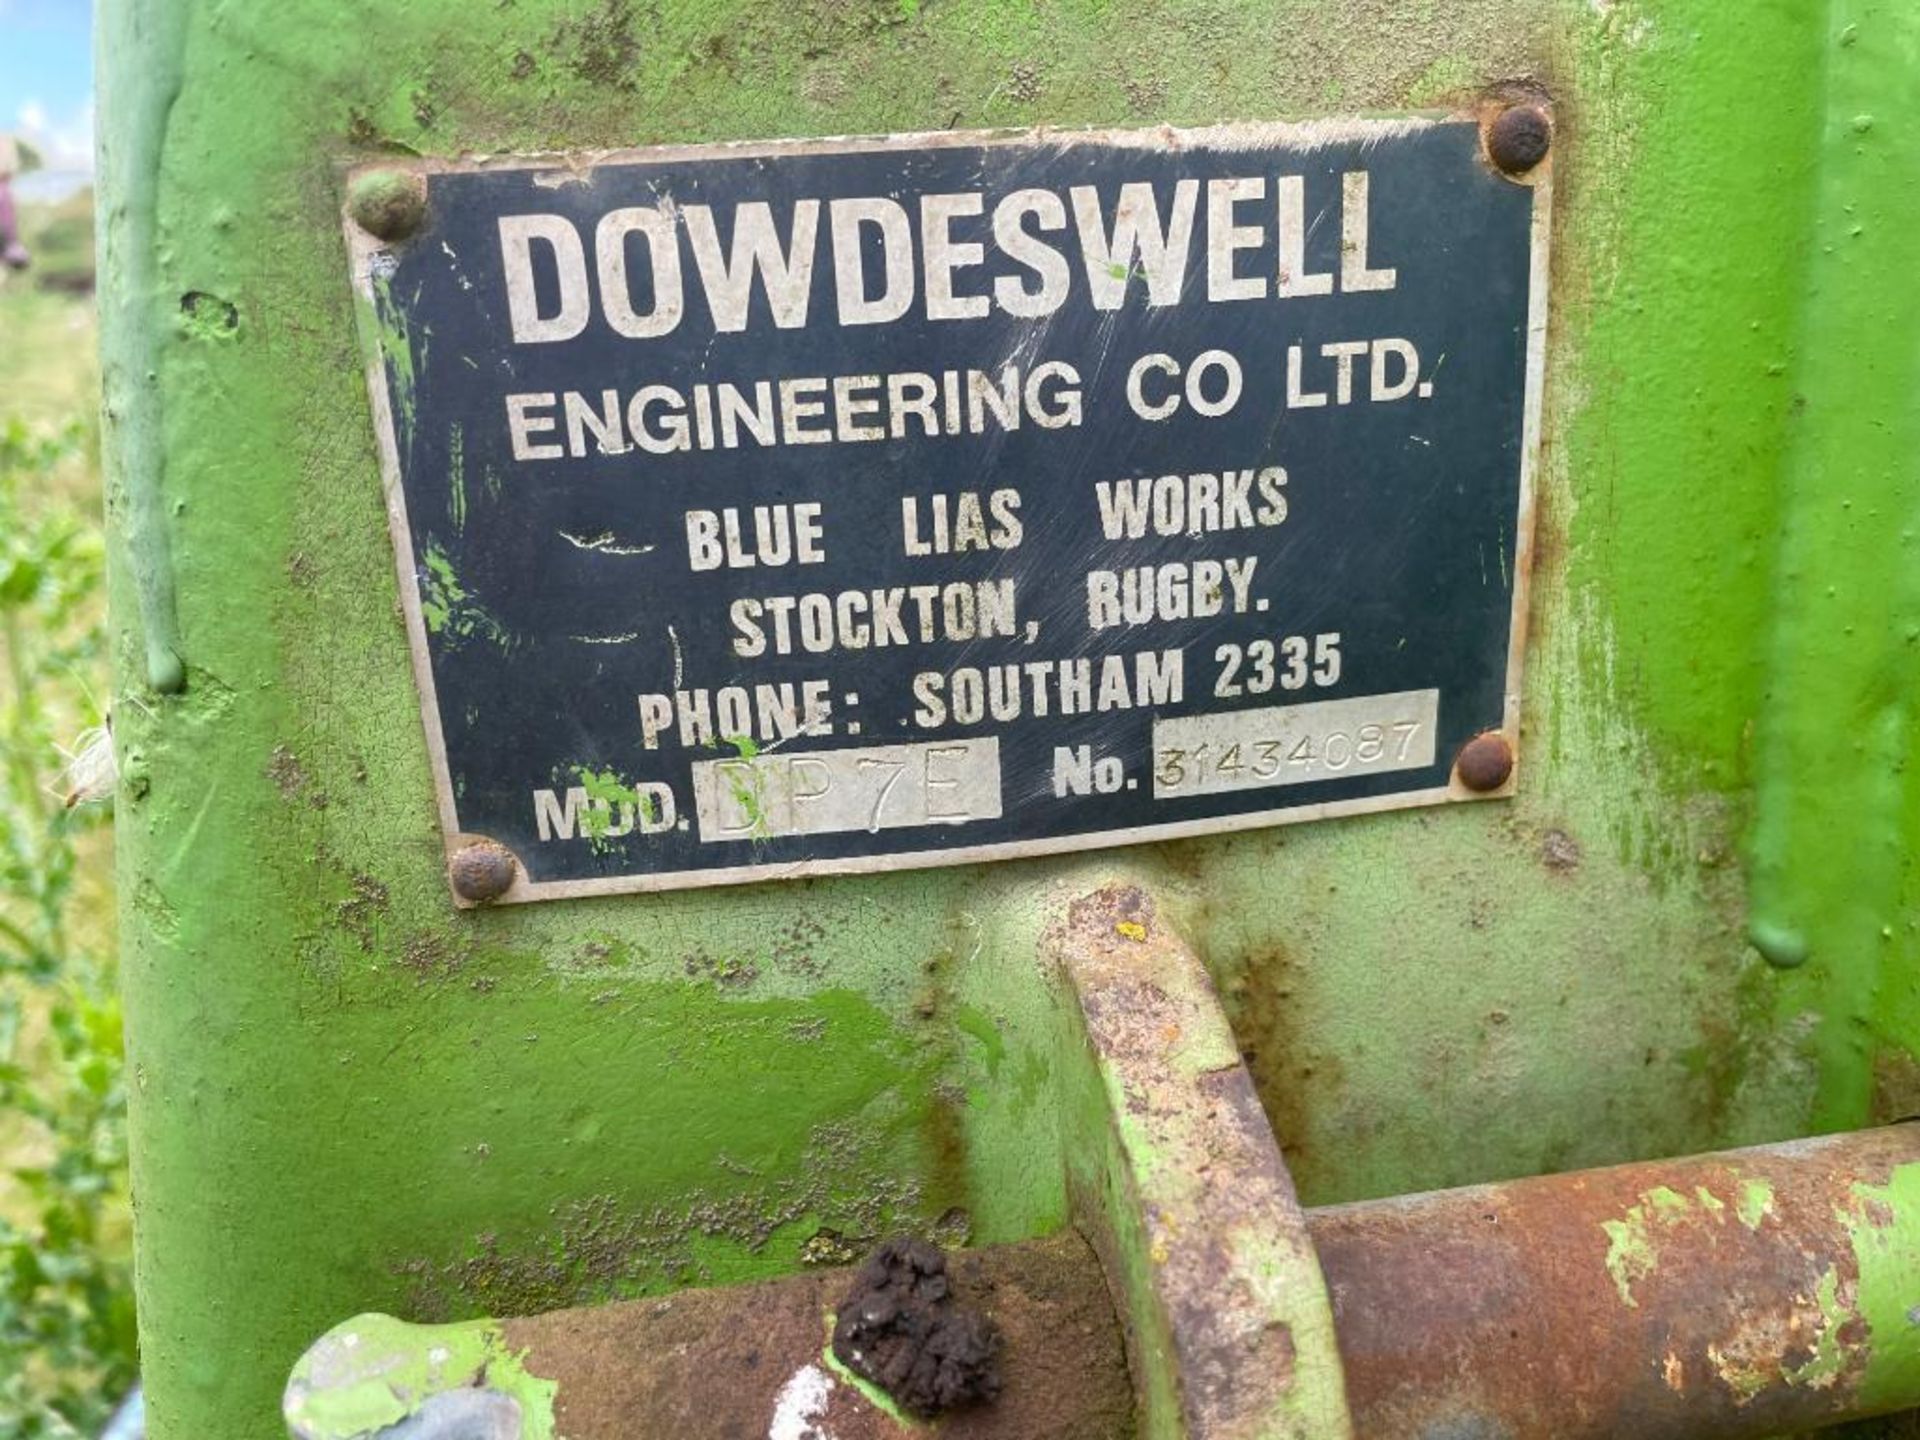 Dowdeswell DP7E 6f (5+1) reversible plough with skimmers. Serial No: 31434087 - Image 3 of 4